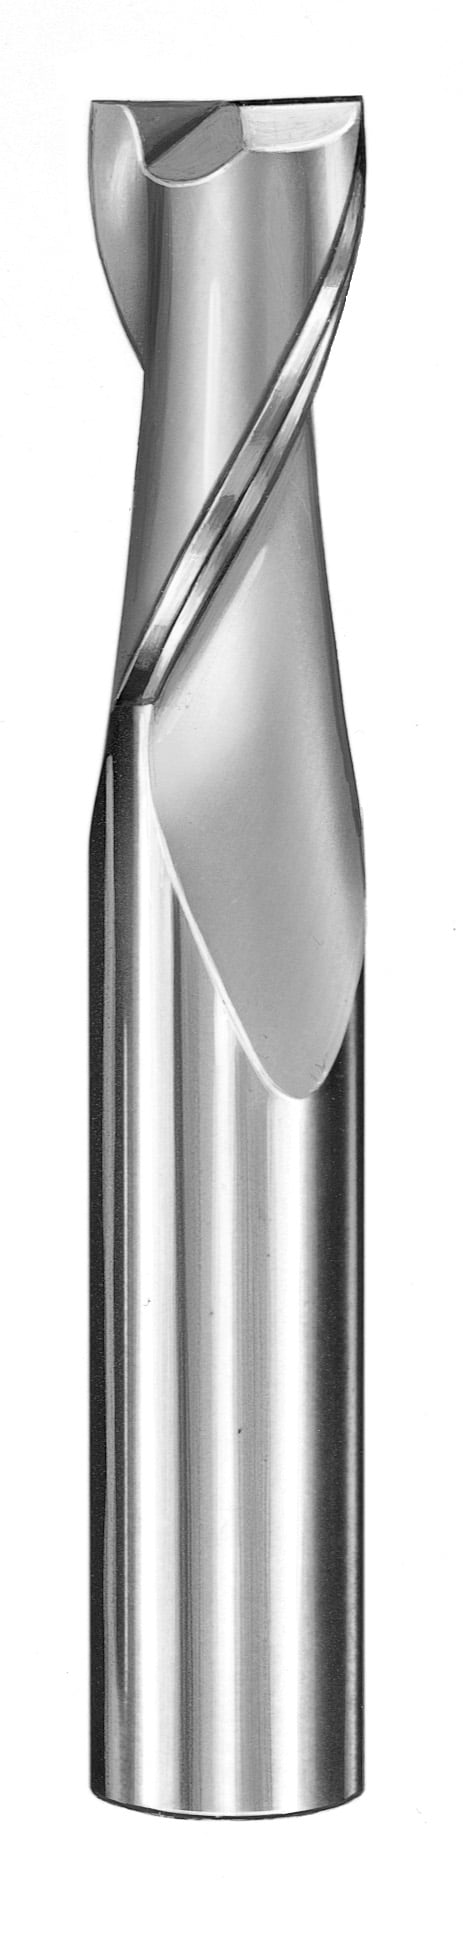 15/64" Dia, 2 Flute, Square End End Mill - 30329